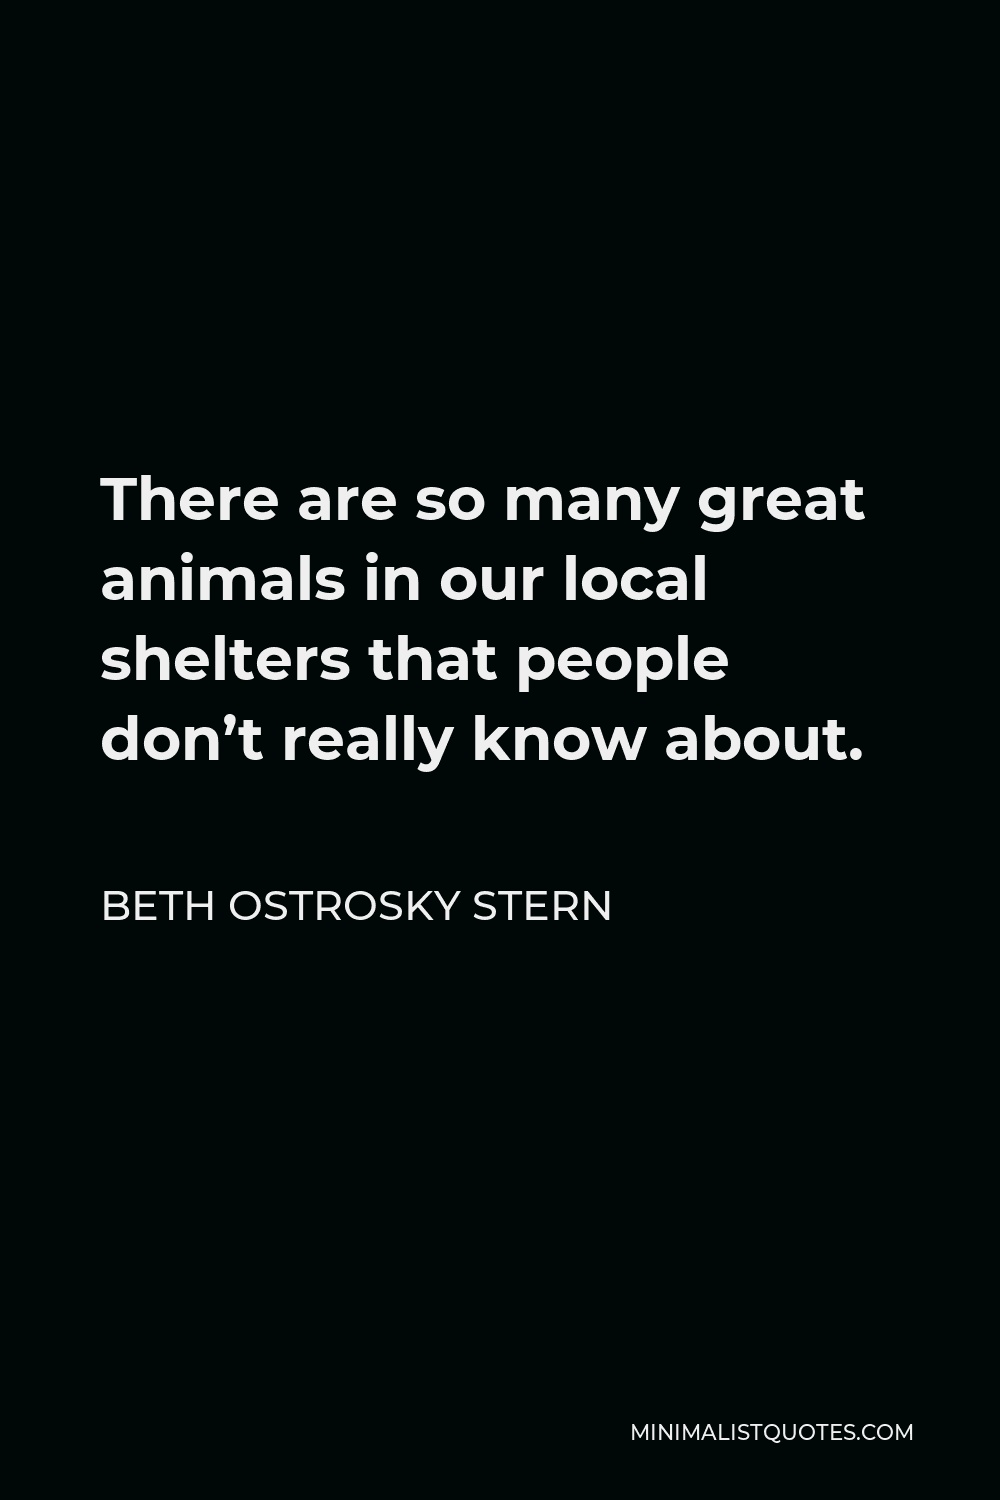 Beth Ostrosky Stern Quote - There are so many great animals in our local shelters that people don’t really know about.